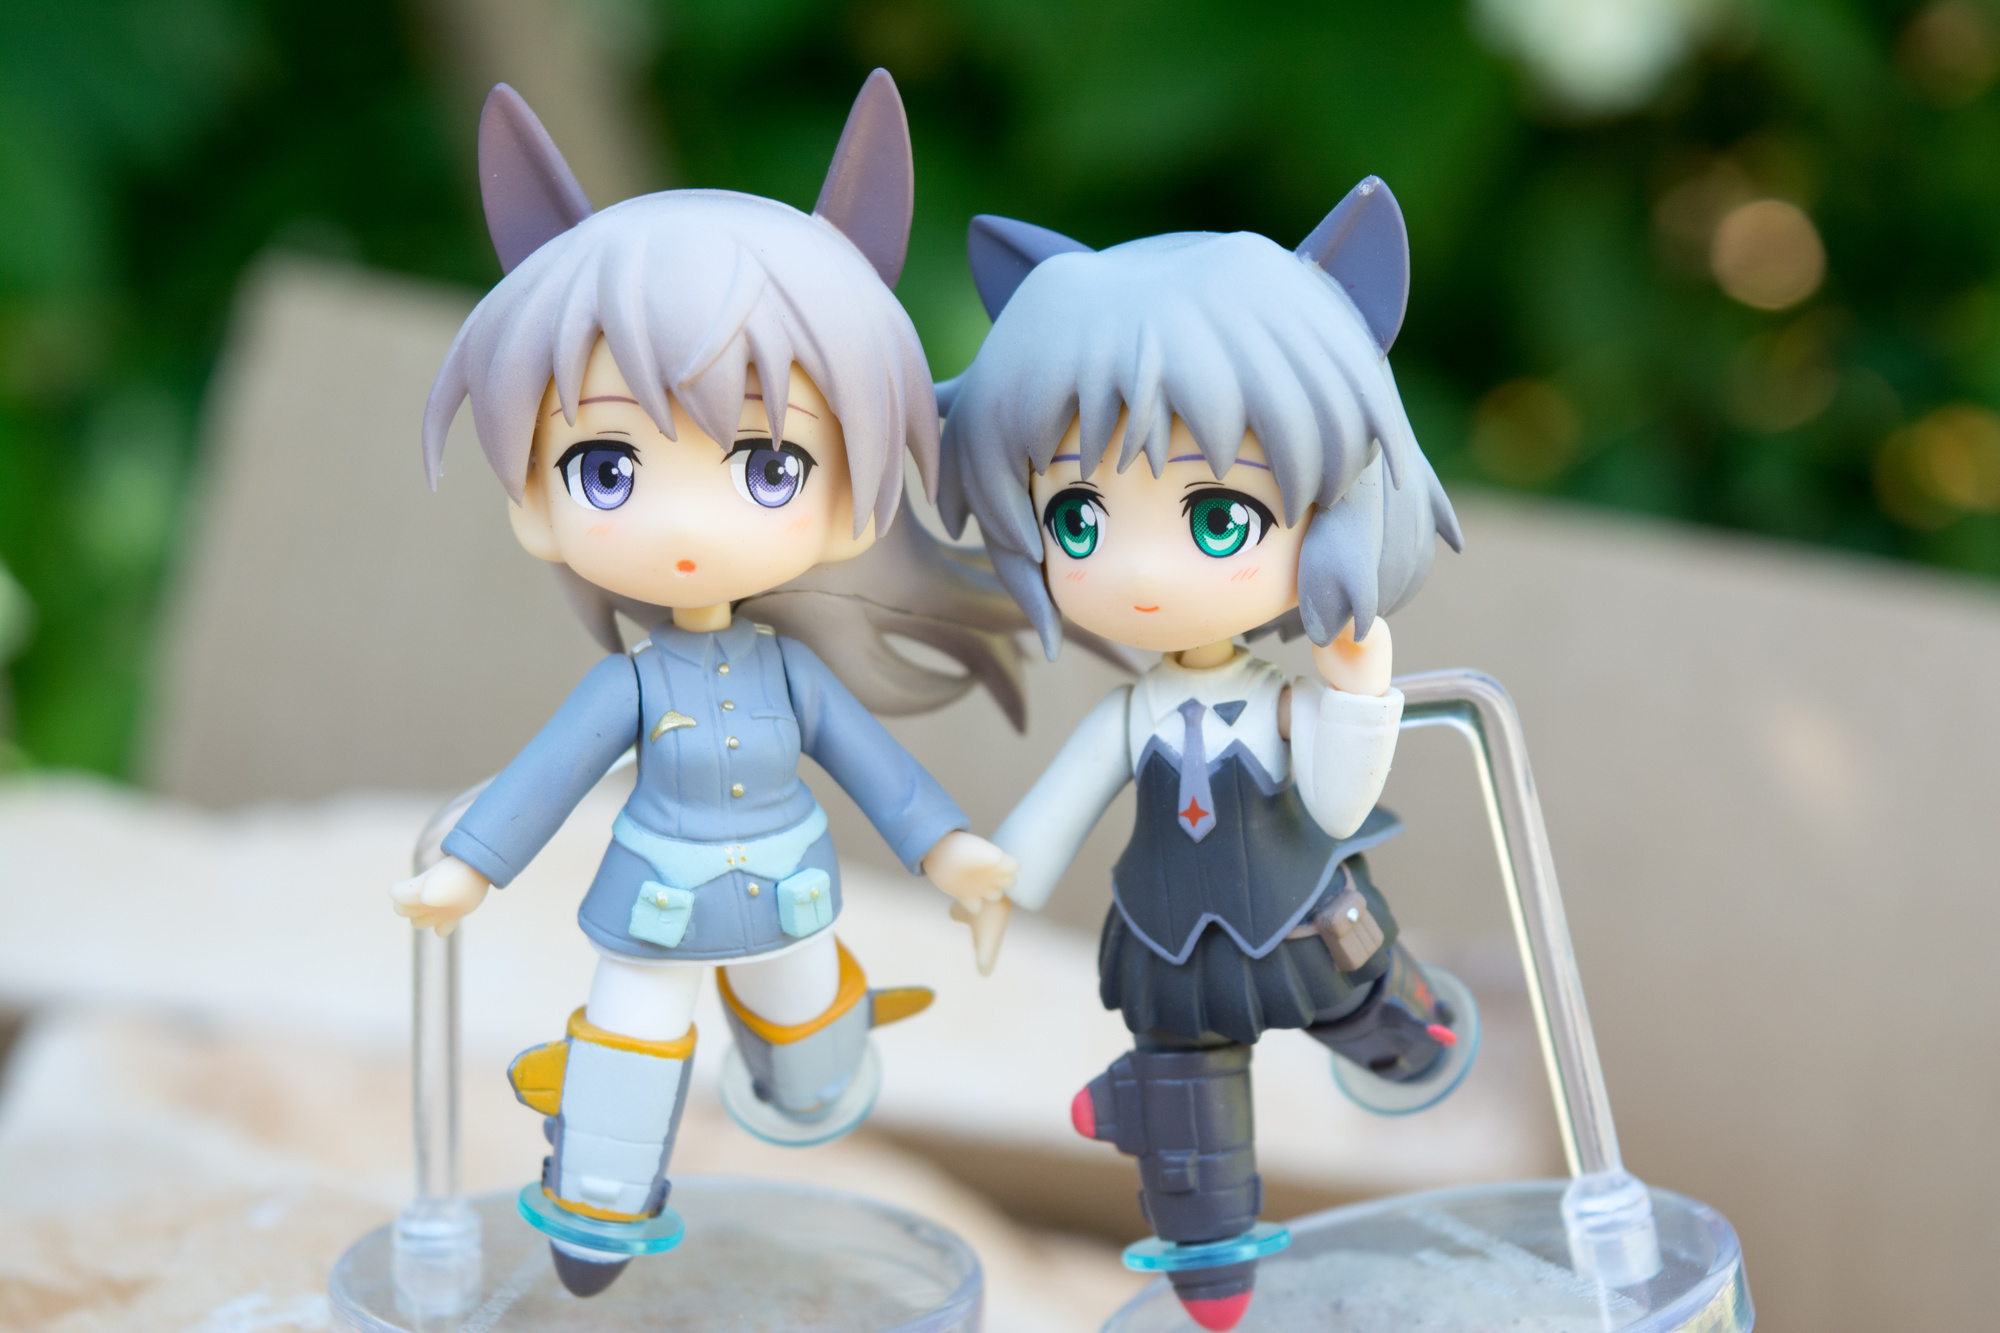 Collection of works by shait. Саня Литвяк штурмовые ведьмы. Strike Witches Nendoroid Figures. Toy's works collection Strike Witches.